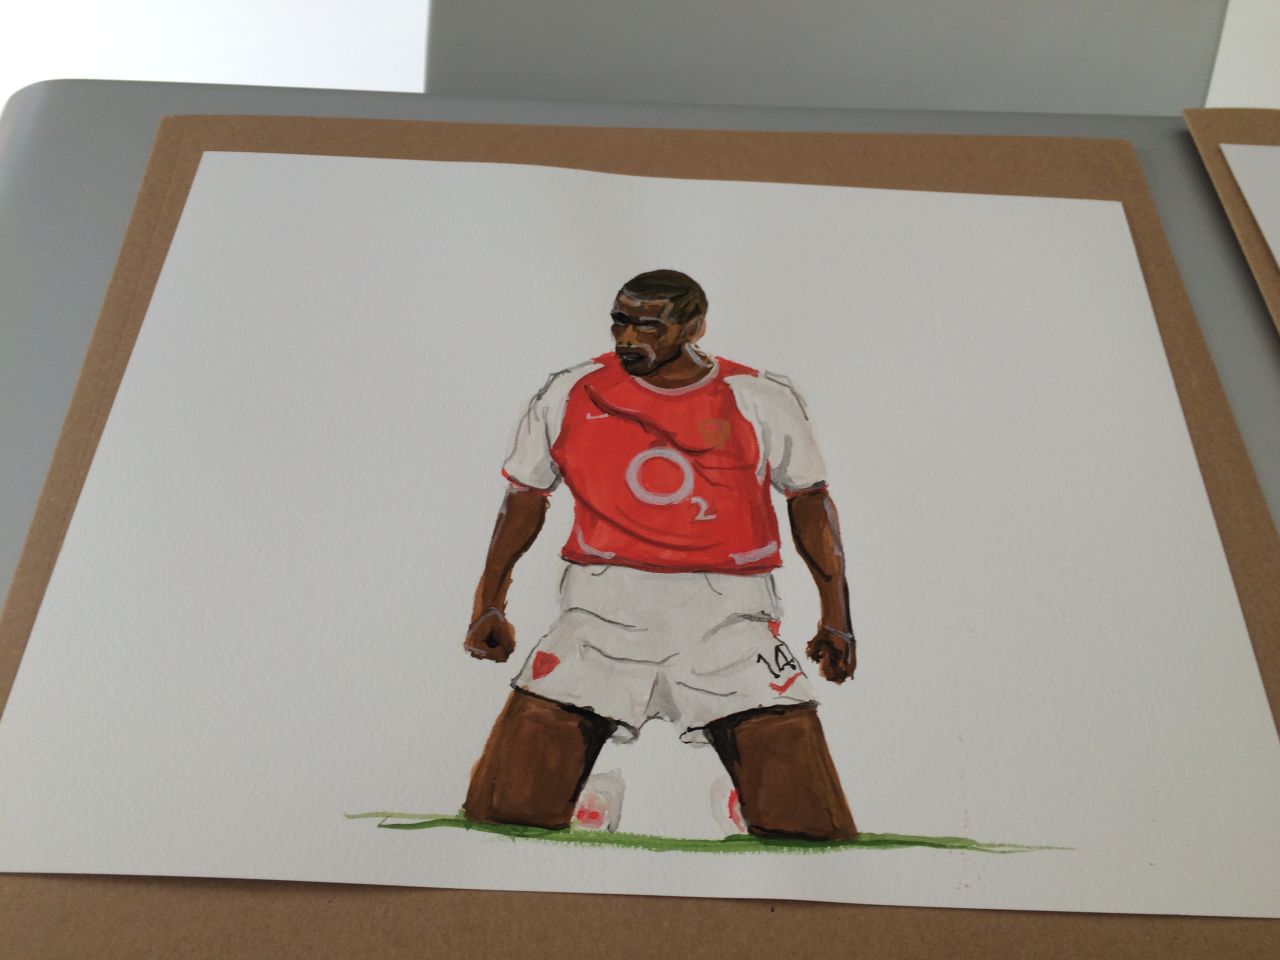 Thierry Henry was so impressed by this painting that he took to Twitter to congratulate Fraser.  The two met at an Arsenal game last season and had a picture taken together. Fraser says it was one of the best moments of his life.